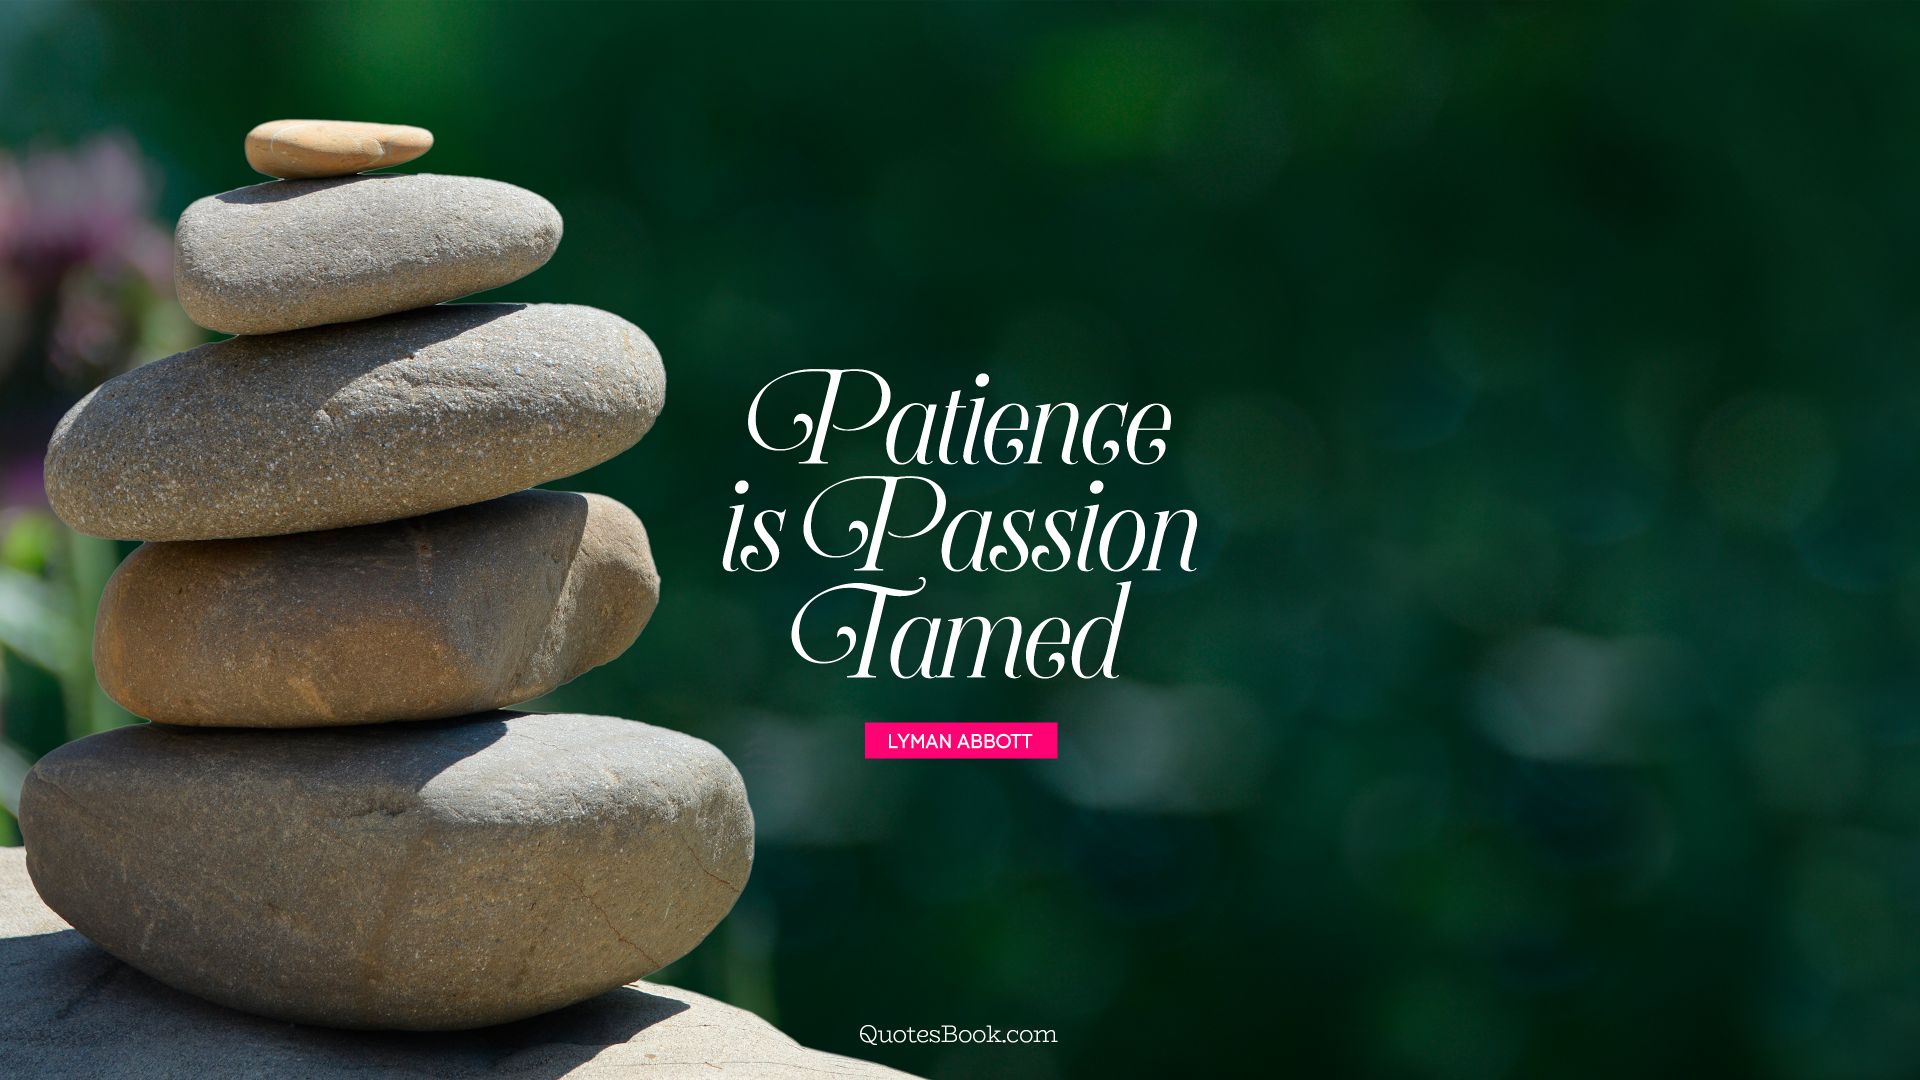 Patience is passion tamed. - Quote by Lyman Abbott